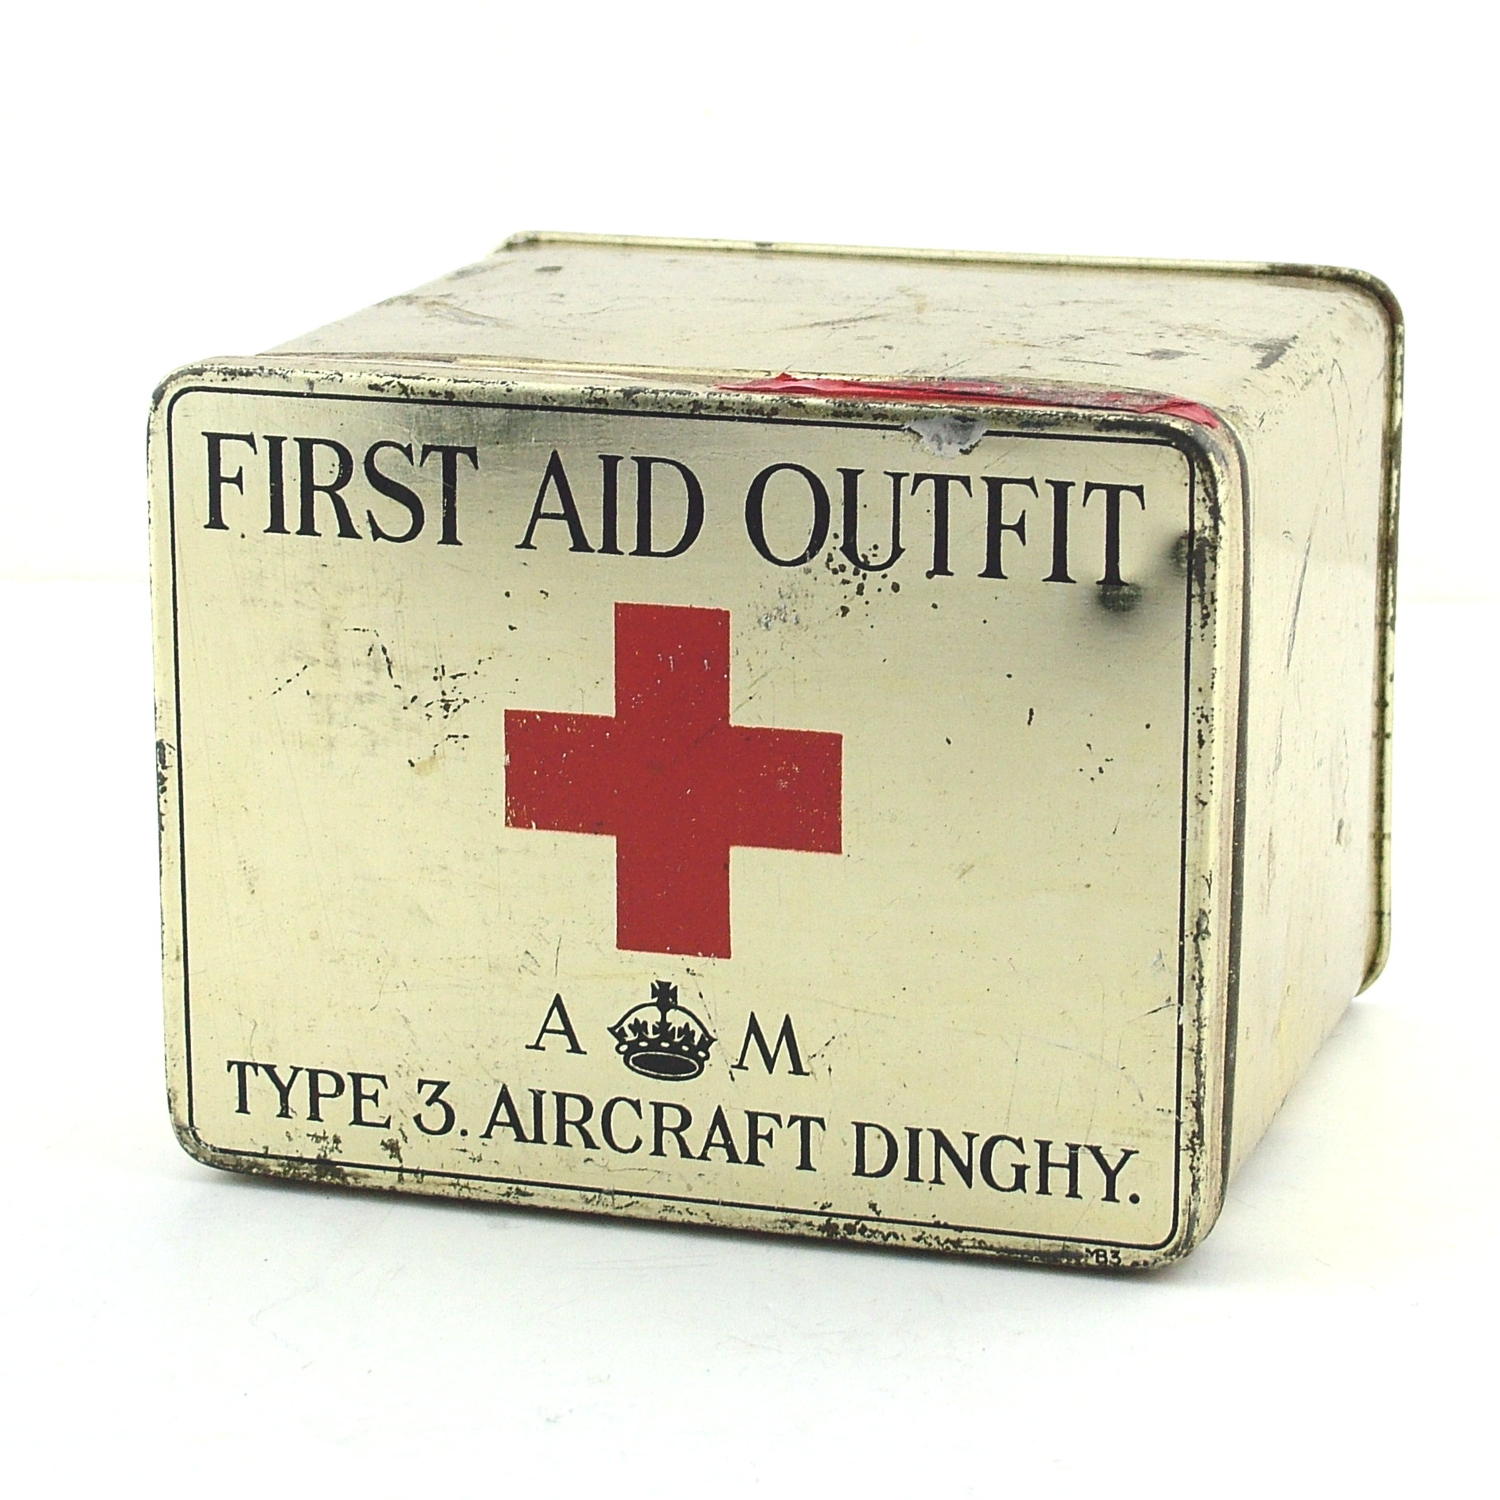 Air Ministry dinghy first aid outfit